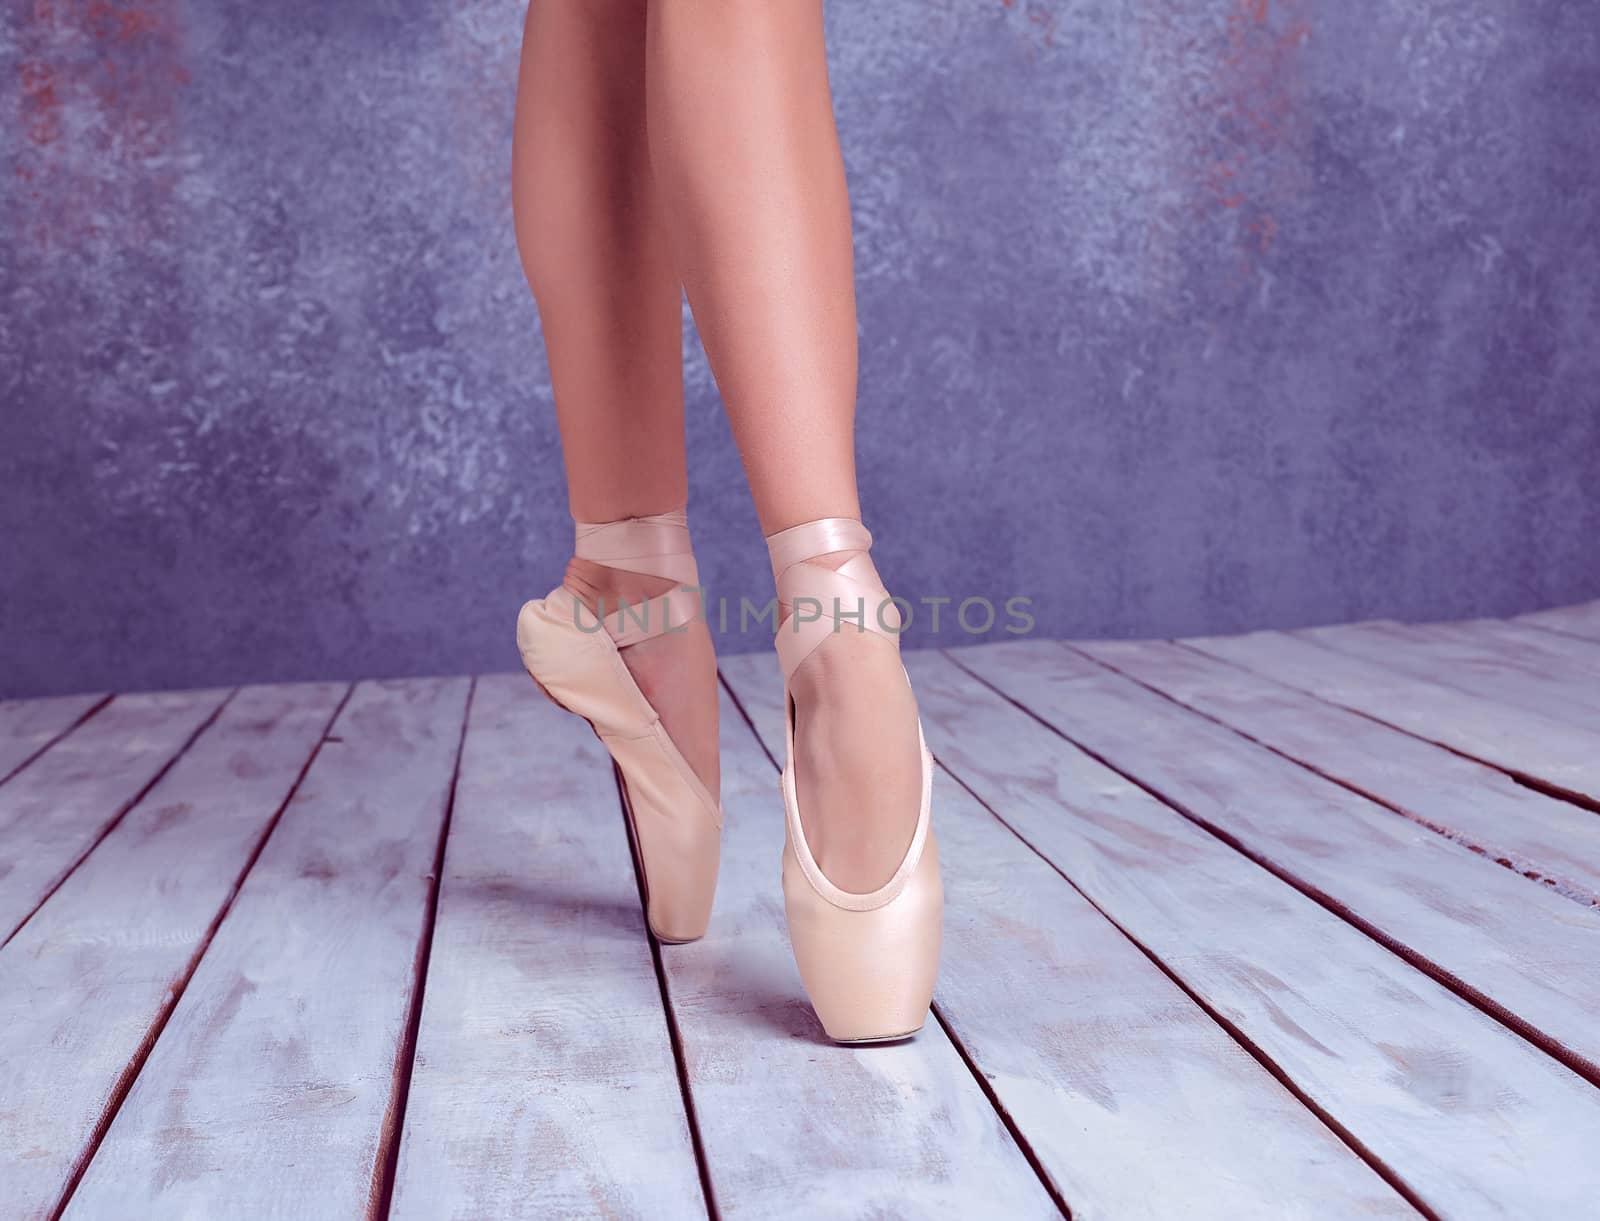 The close-up feet of young ballerina in pointe shoes against the background of the wooden floor